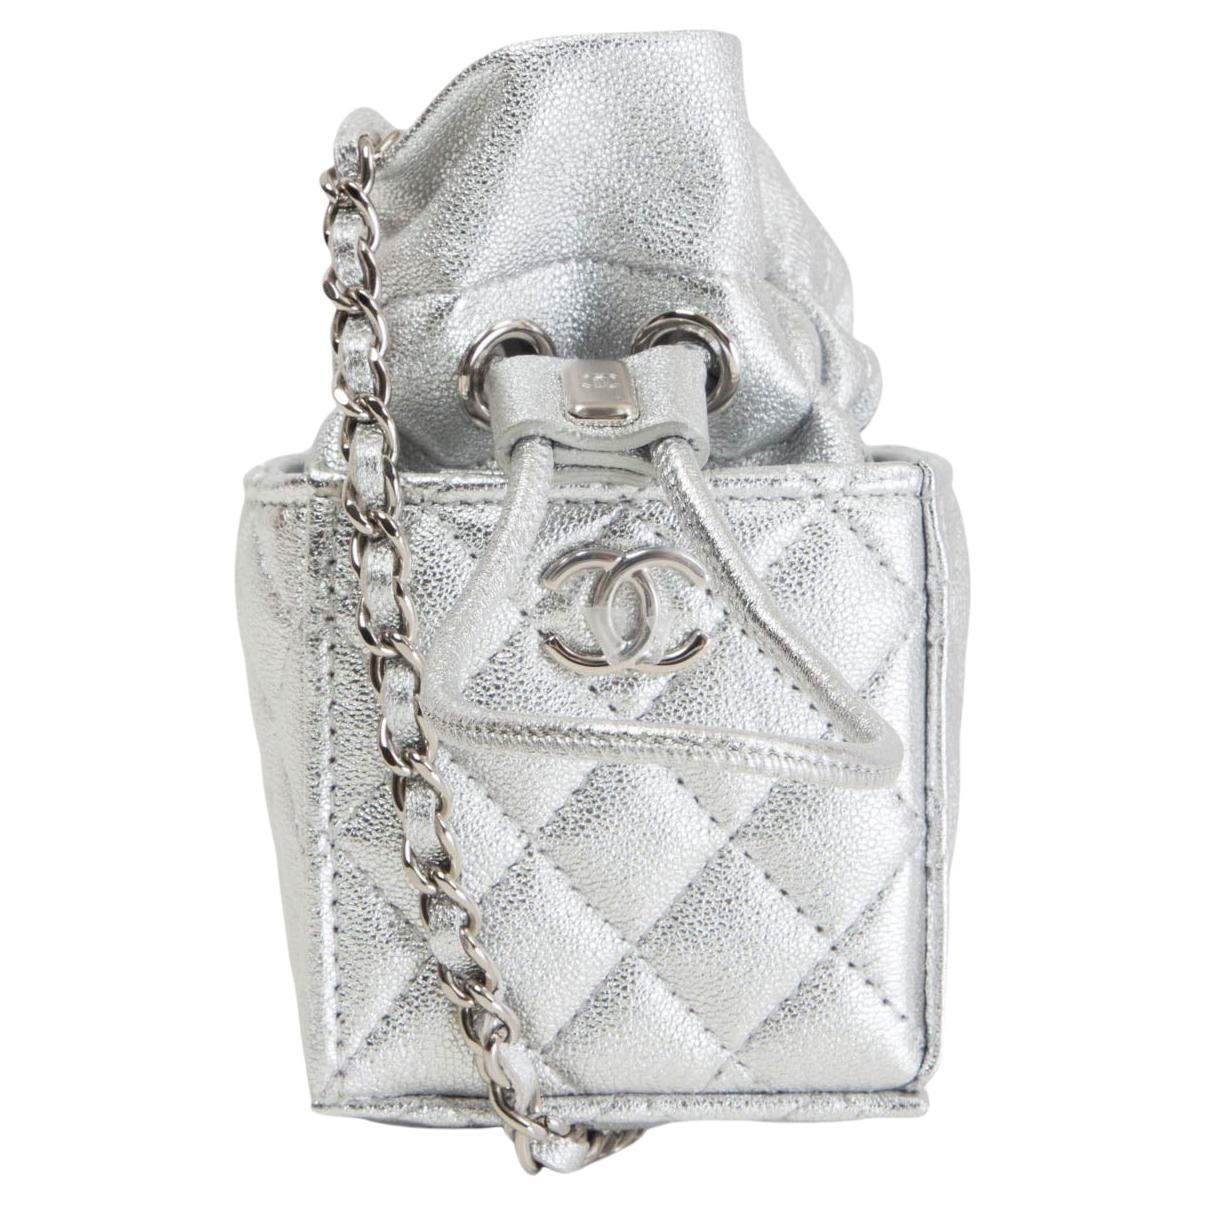 Chanel Vip Gift Bag - 2 For Sale on 1stDibs  chanel vip gift crossbody  bag, chanel vip gift duffle bag, how to get chanel vip gifts